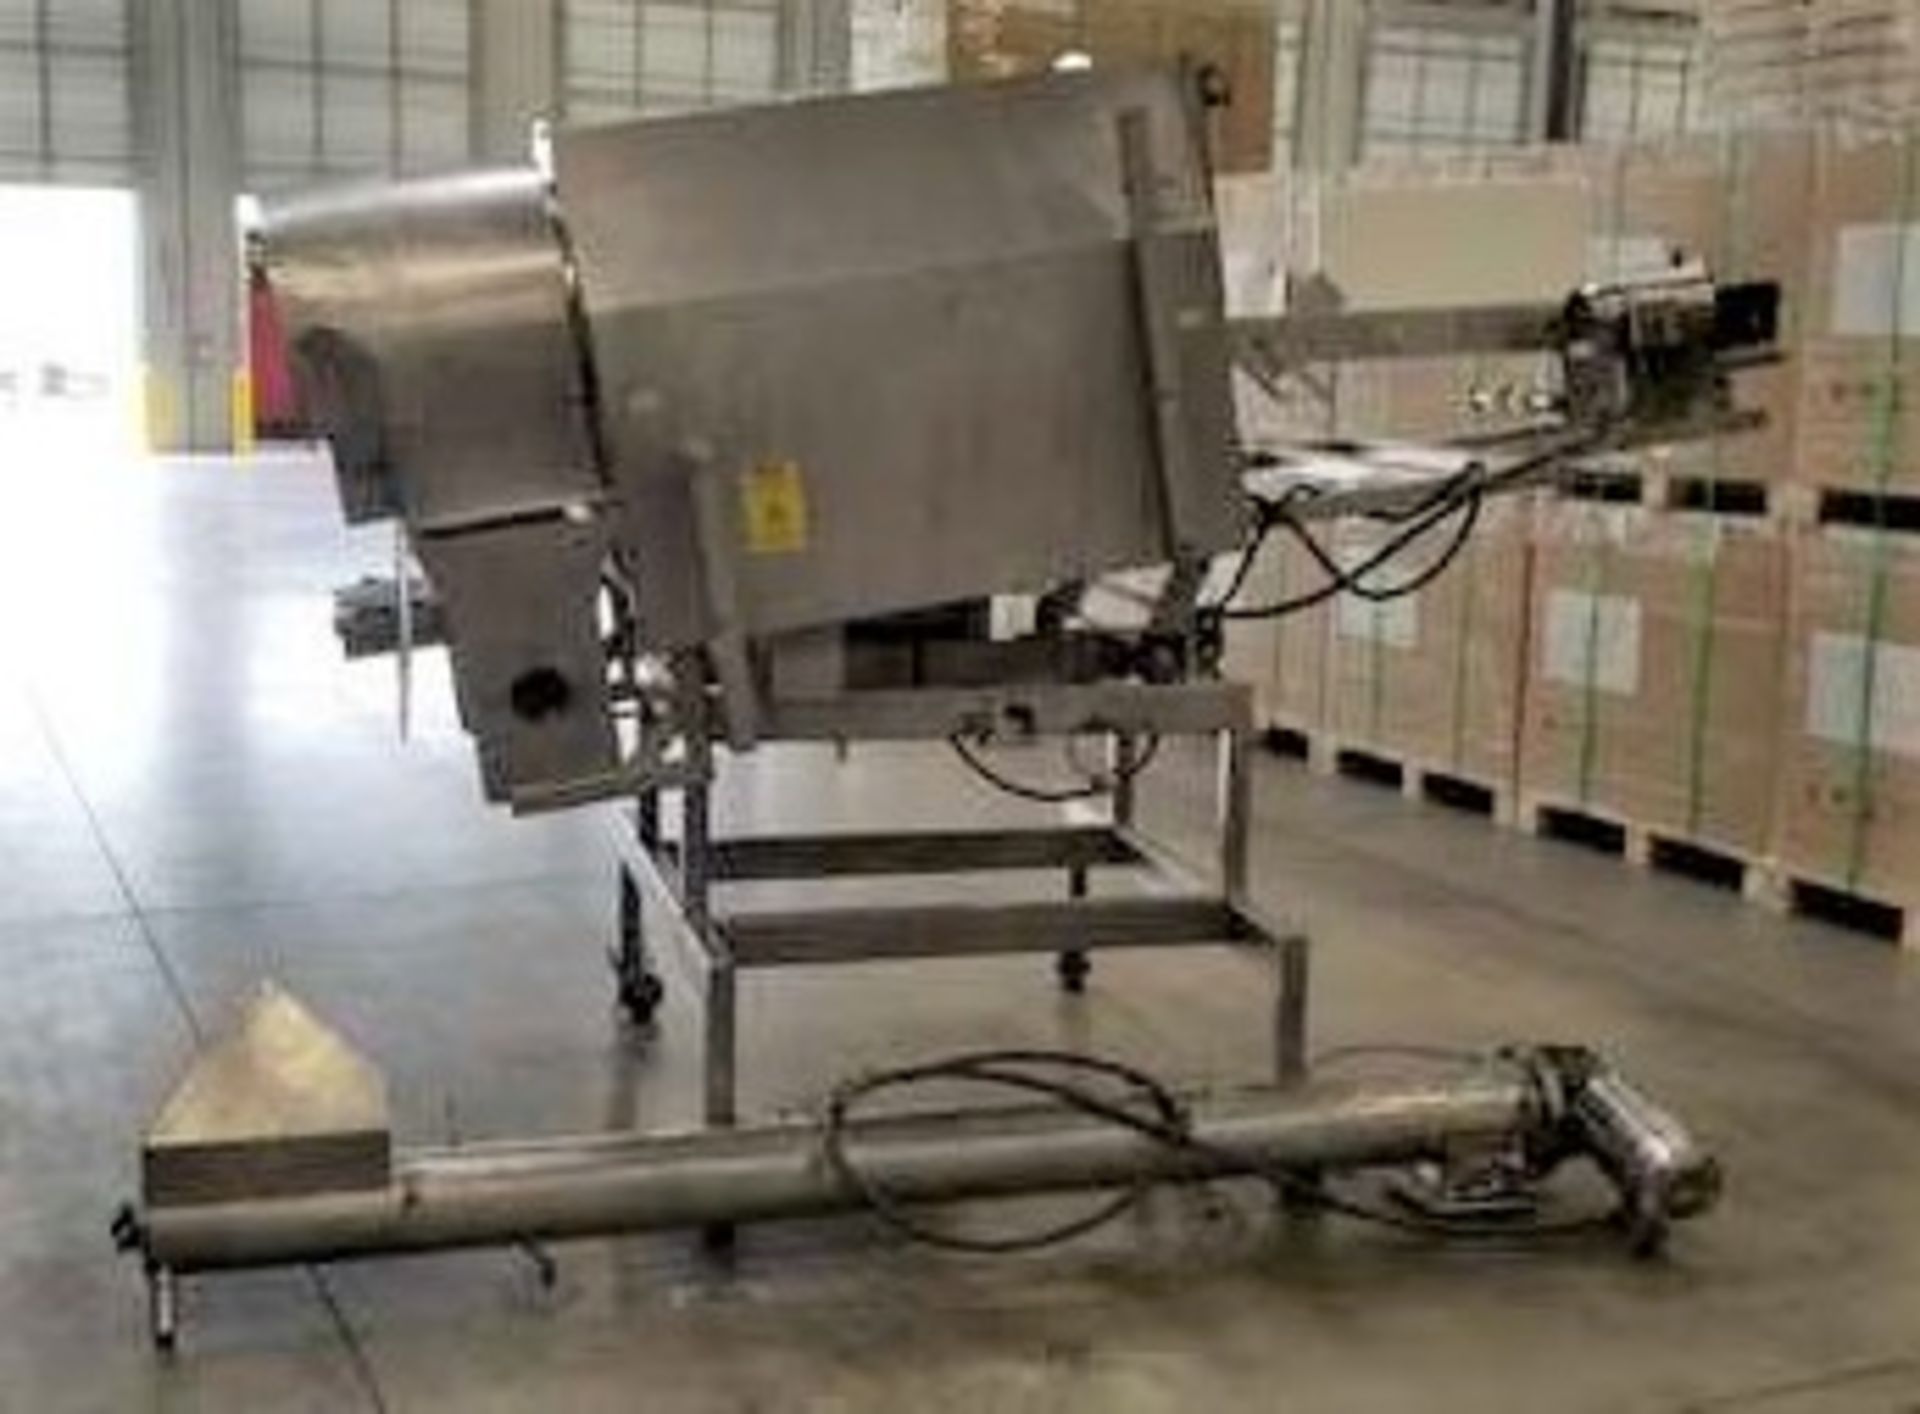 S/S Barrel Breader. Manufactured by FoodDesign Machinery & Systems. Barrel is 24" Dia x 5'8" Long.